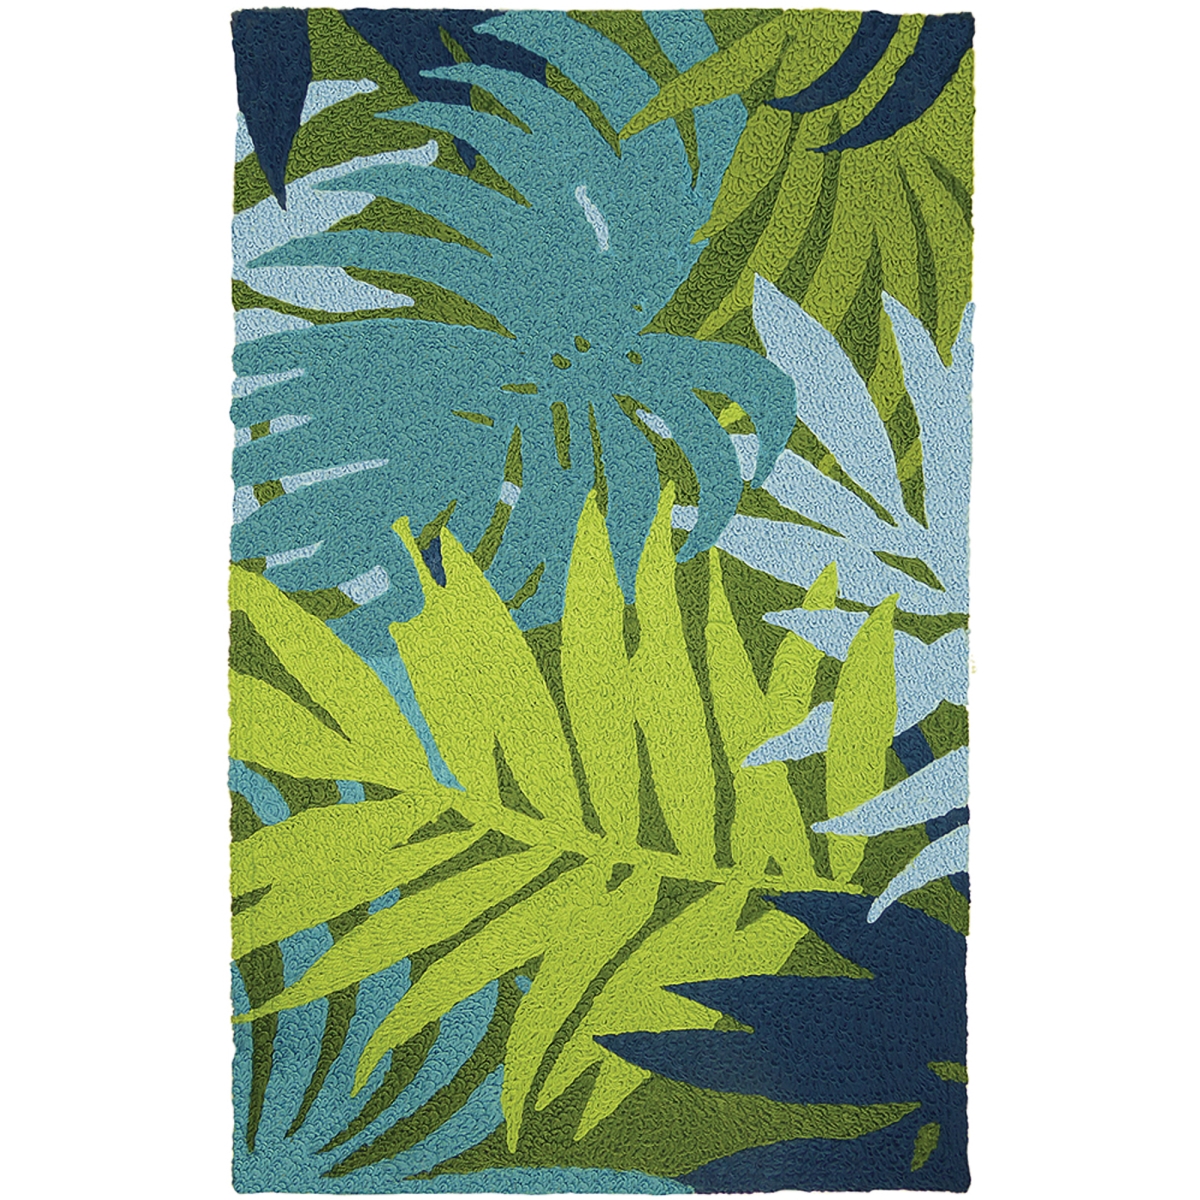 Jio-hd017e 58 X 78 In. Blue Palms Indoor & Outdoor Area Rug